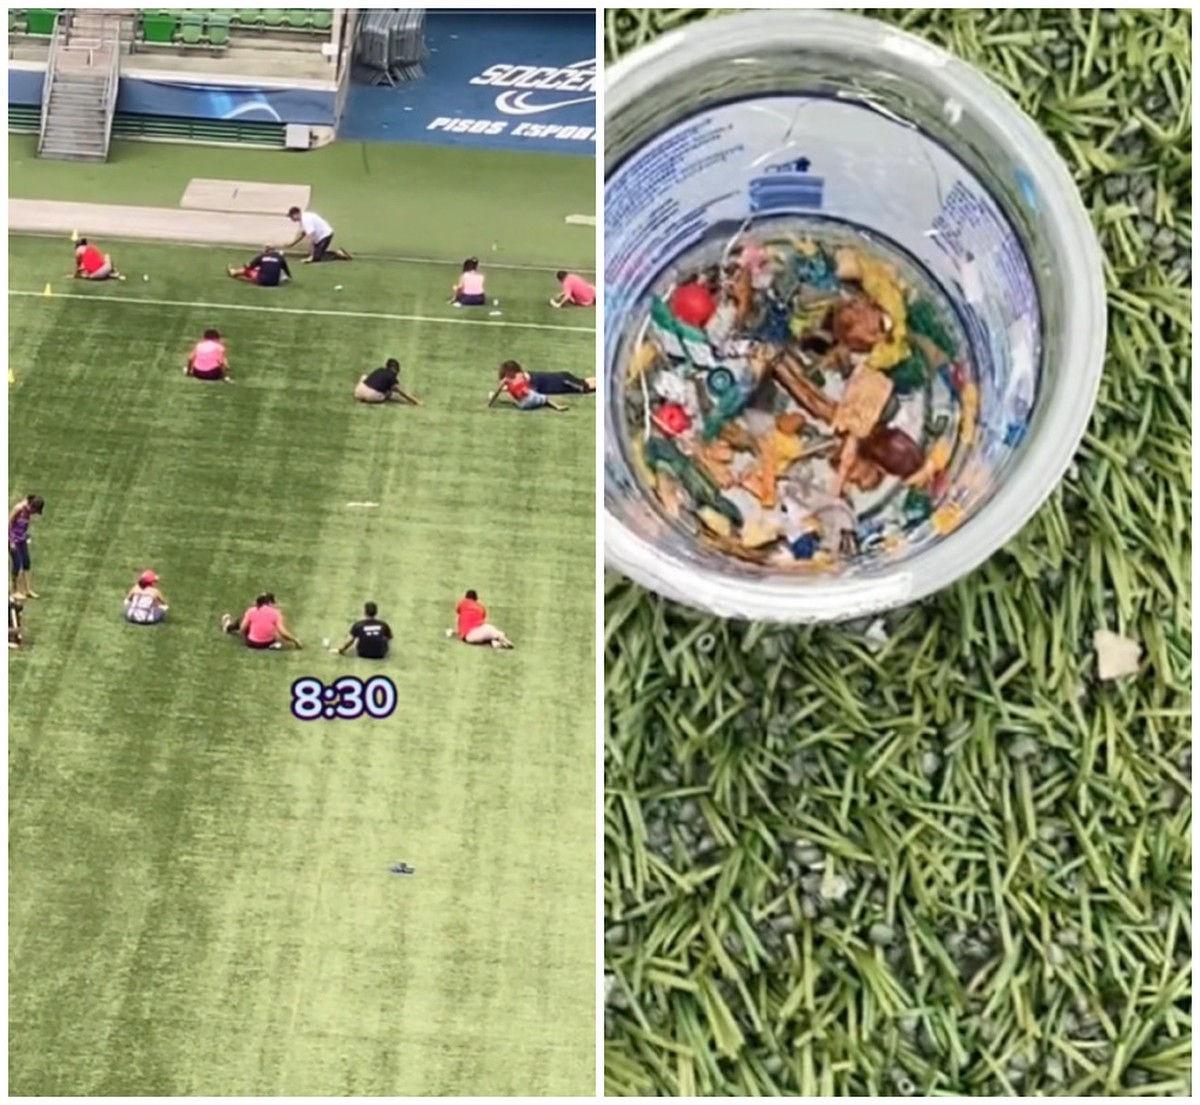 Allianz Parque has a joint effort to remove lawn beads 1 month after Taylor Swift concerts;  ‘thorough maintenance’